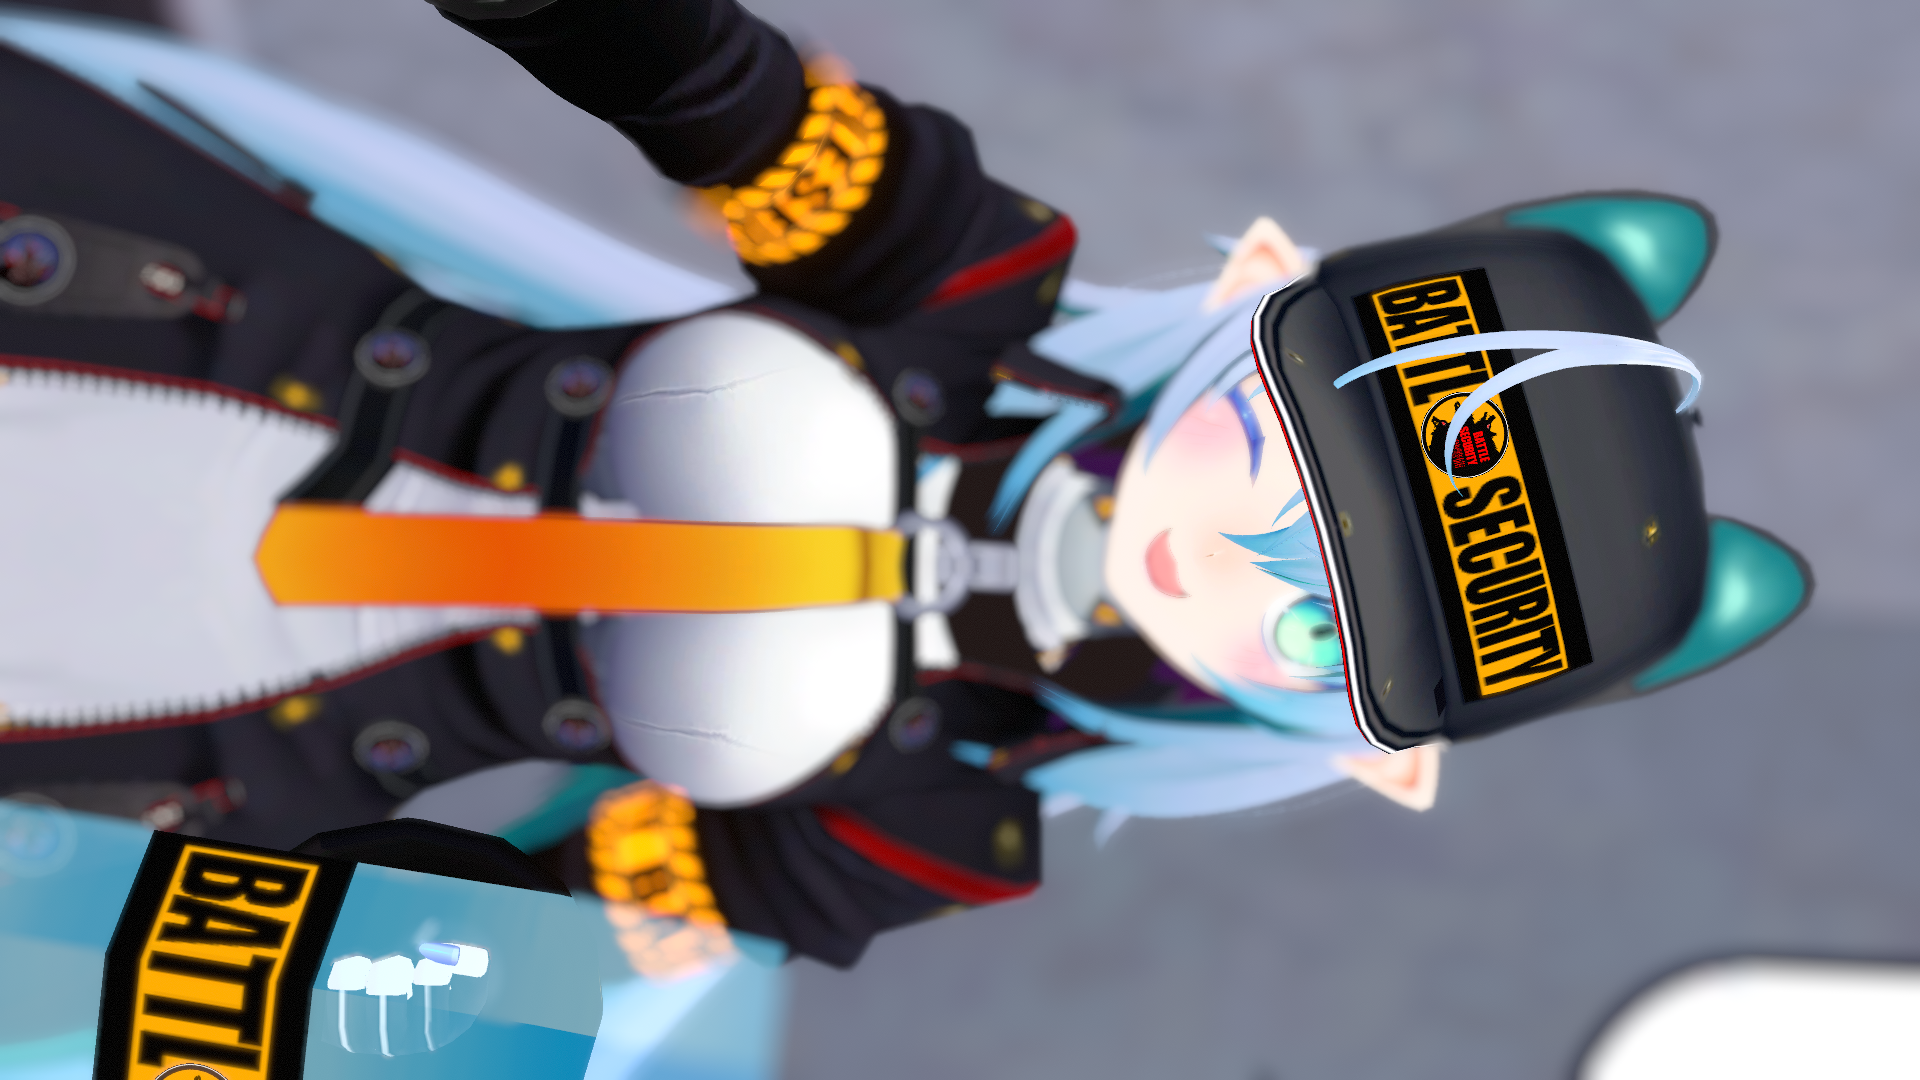 VRChat_1920x1080_2021-12-05_06-09-11.564.png